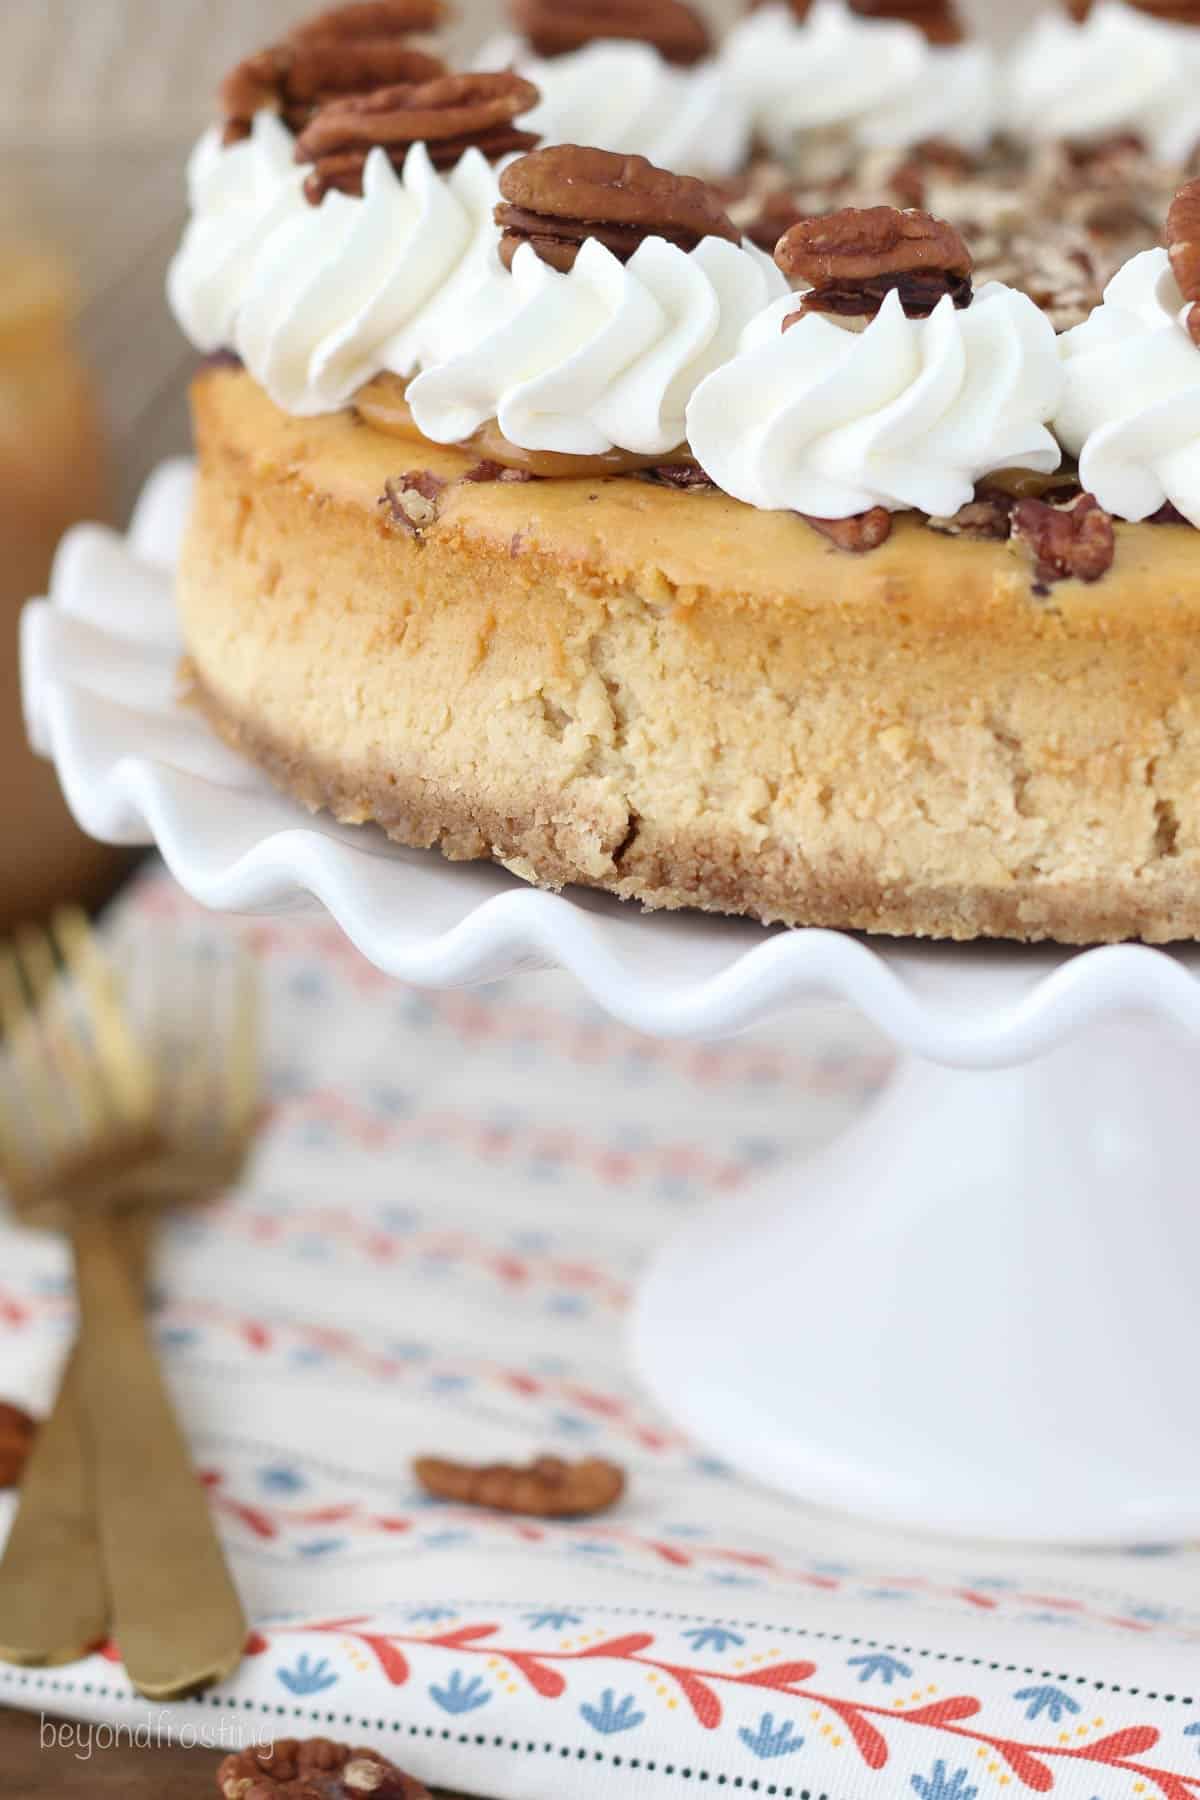 side view of a whole caramel pecan cheesecake on a cake stand